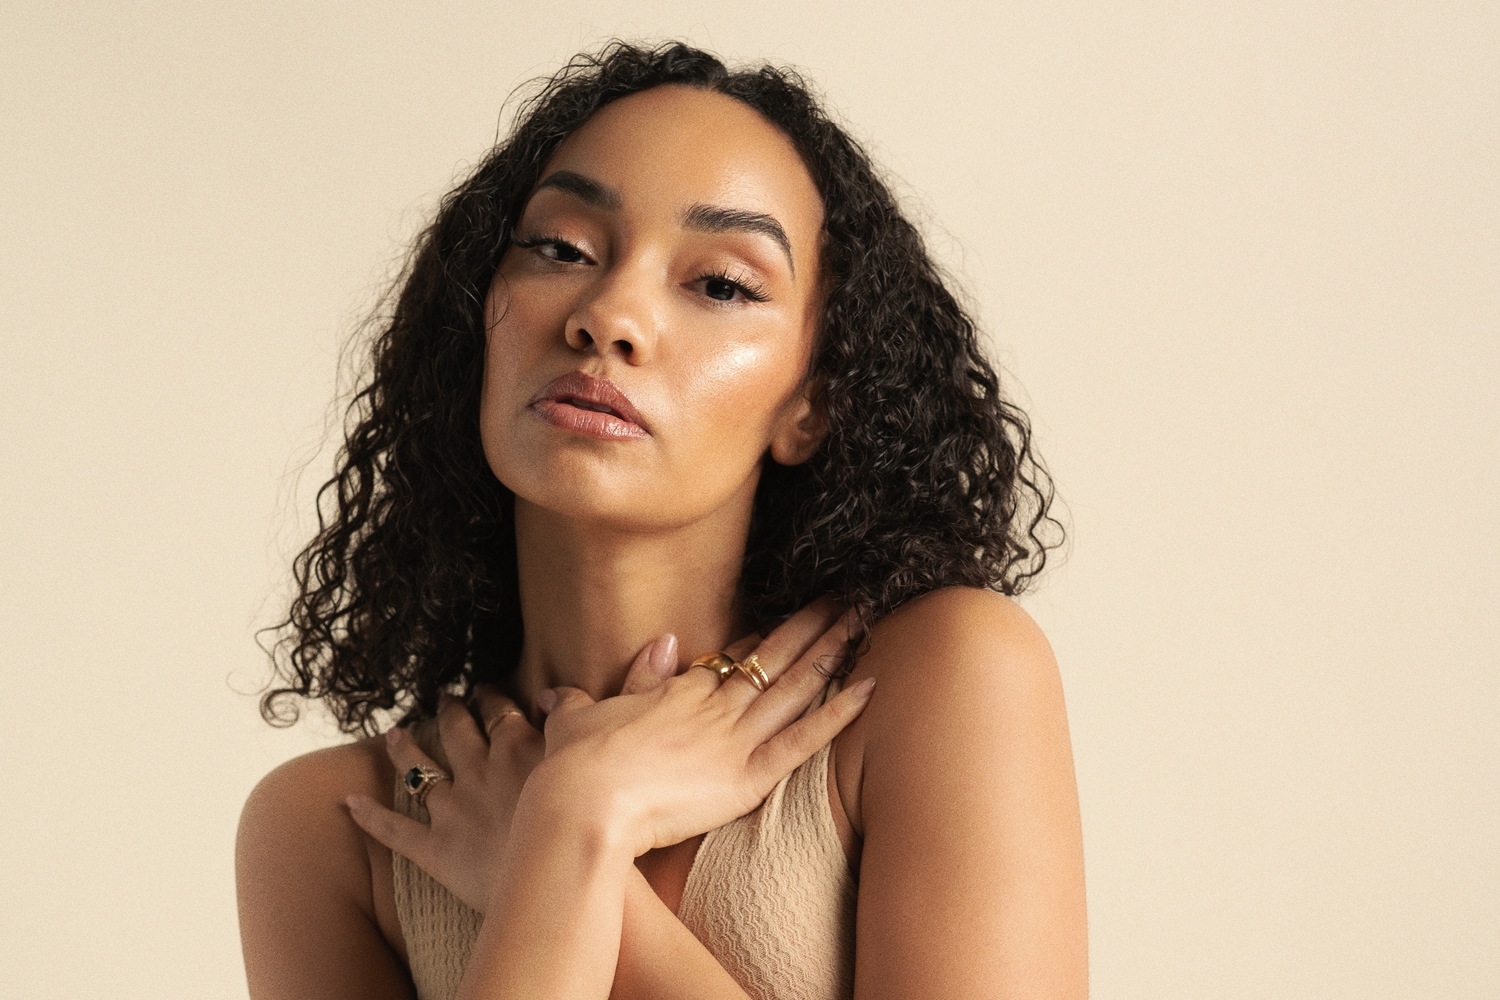 Little Mix's Leigh-Anne announces debut solo EP 'No Hard Feelings'